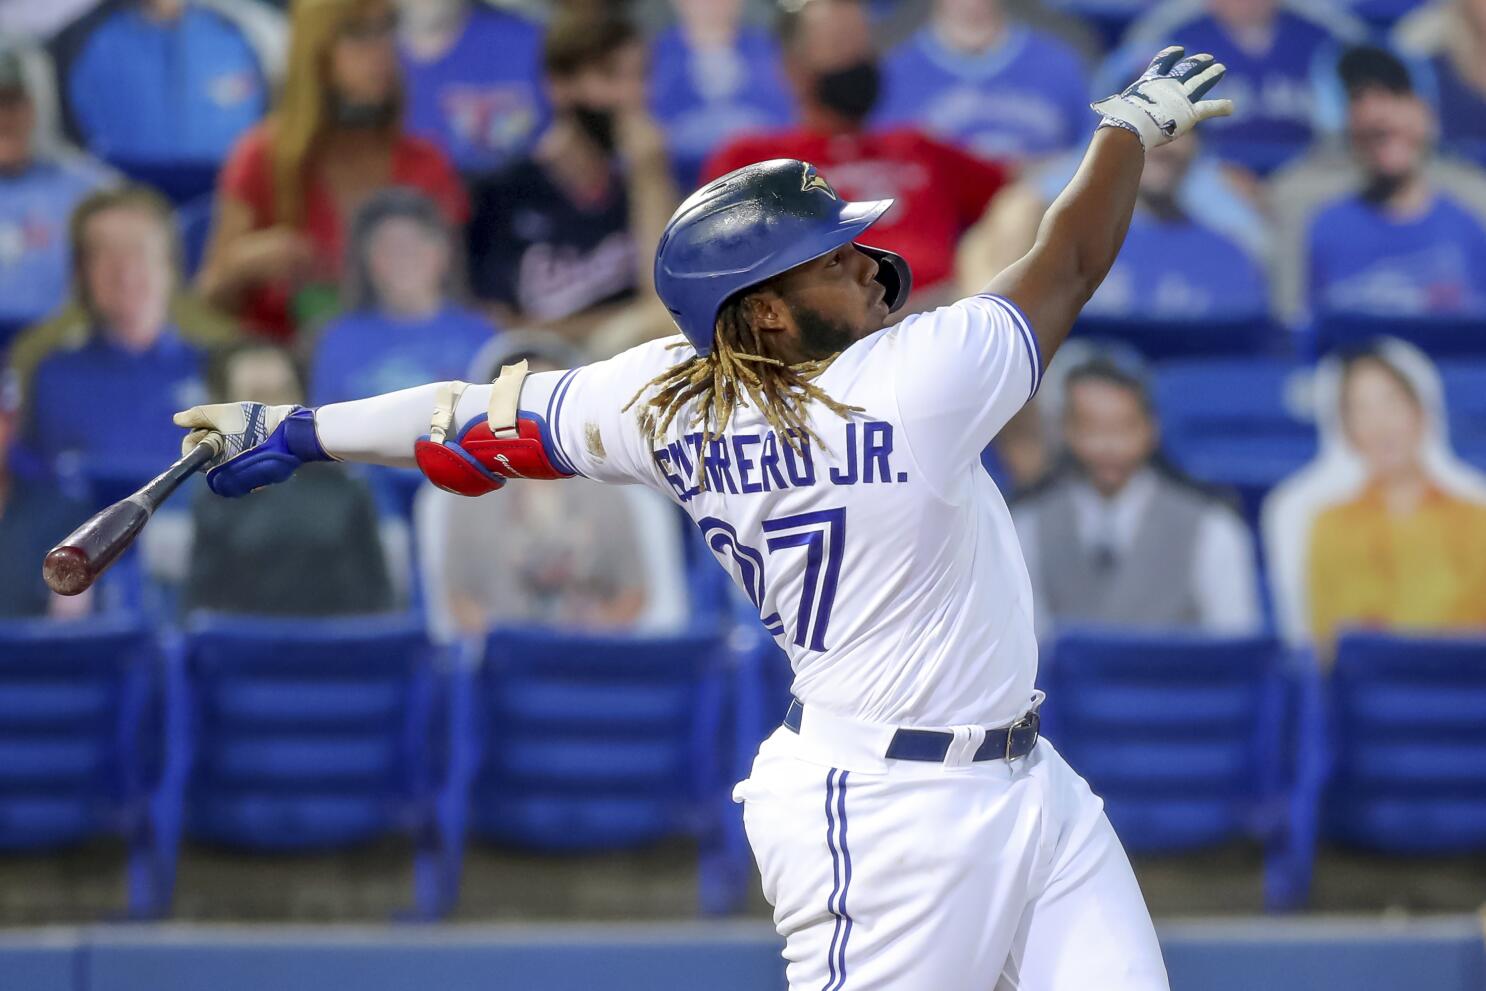 Guerrero powers Jays to win in return to Buffalo, Local Sports